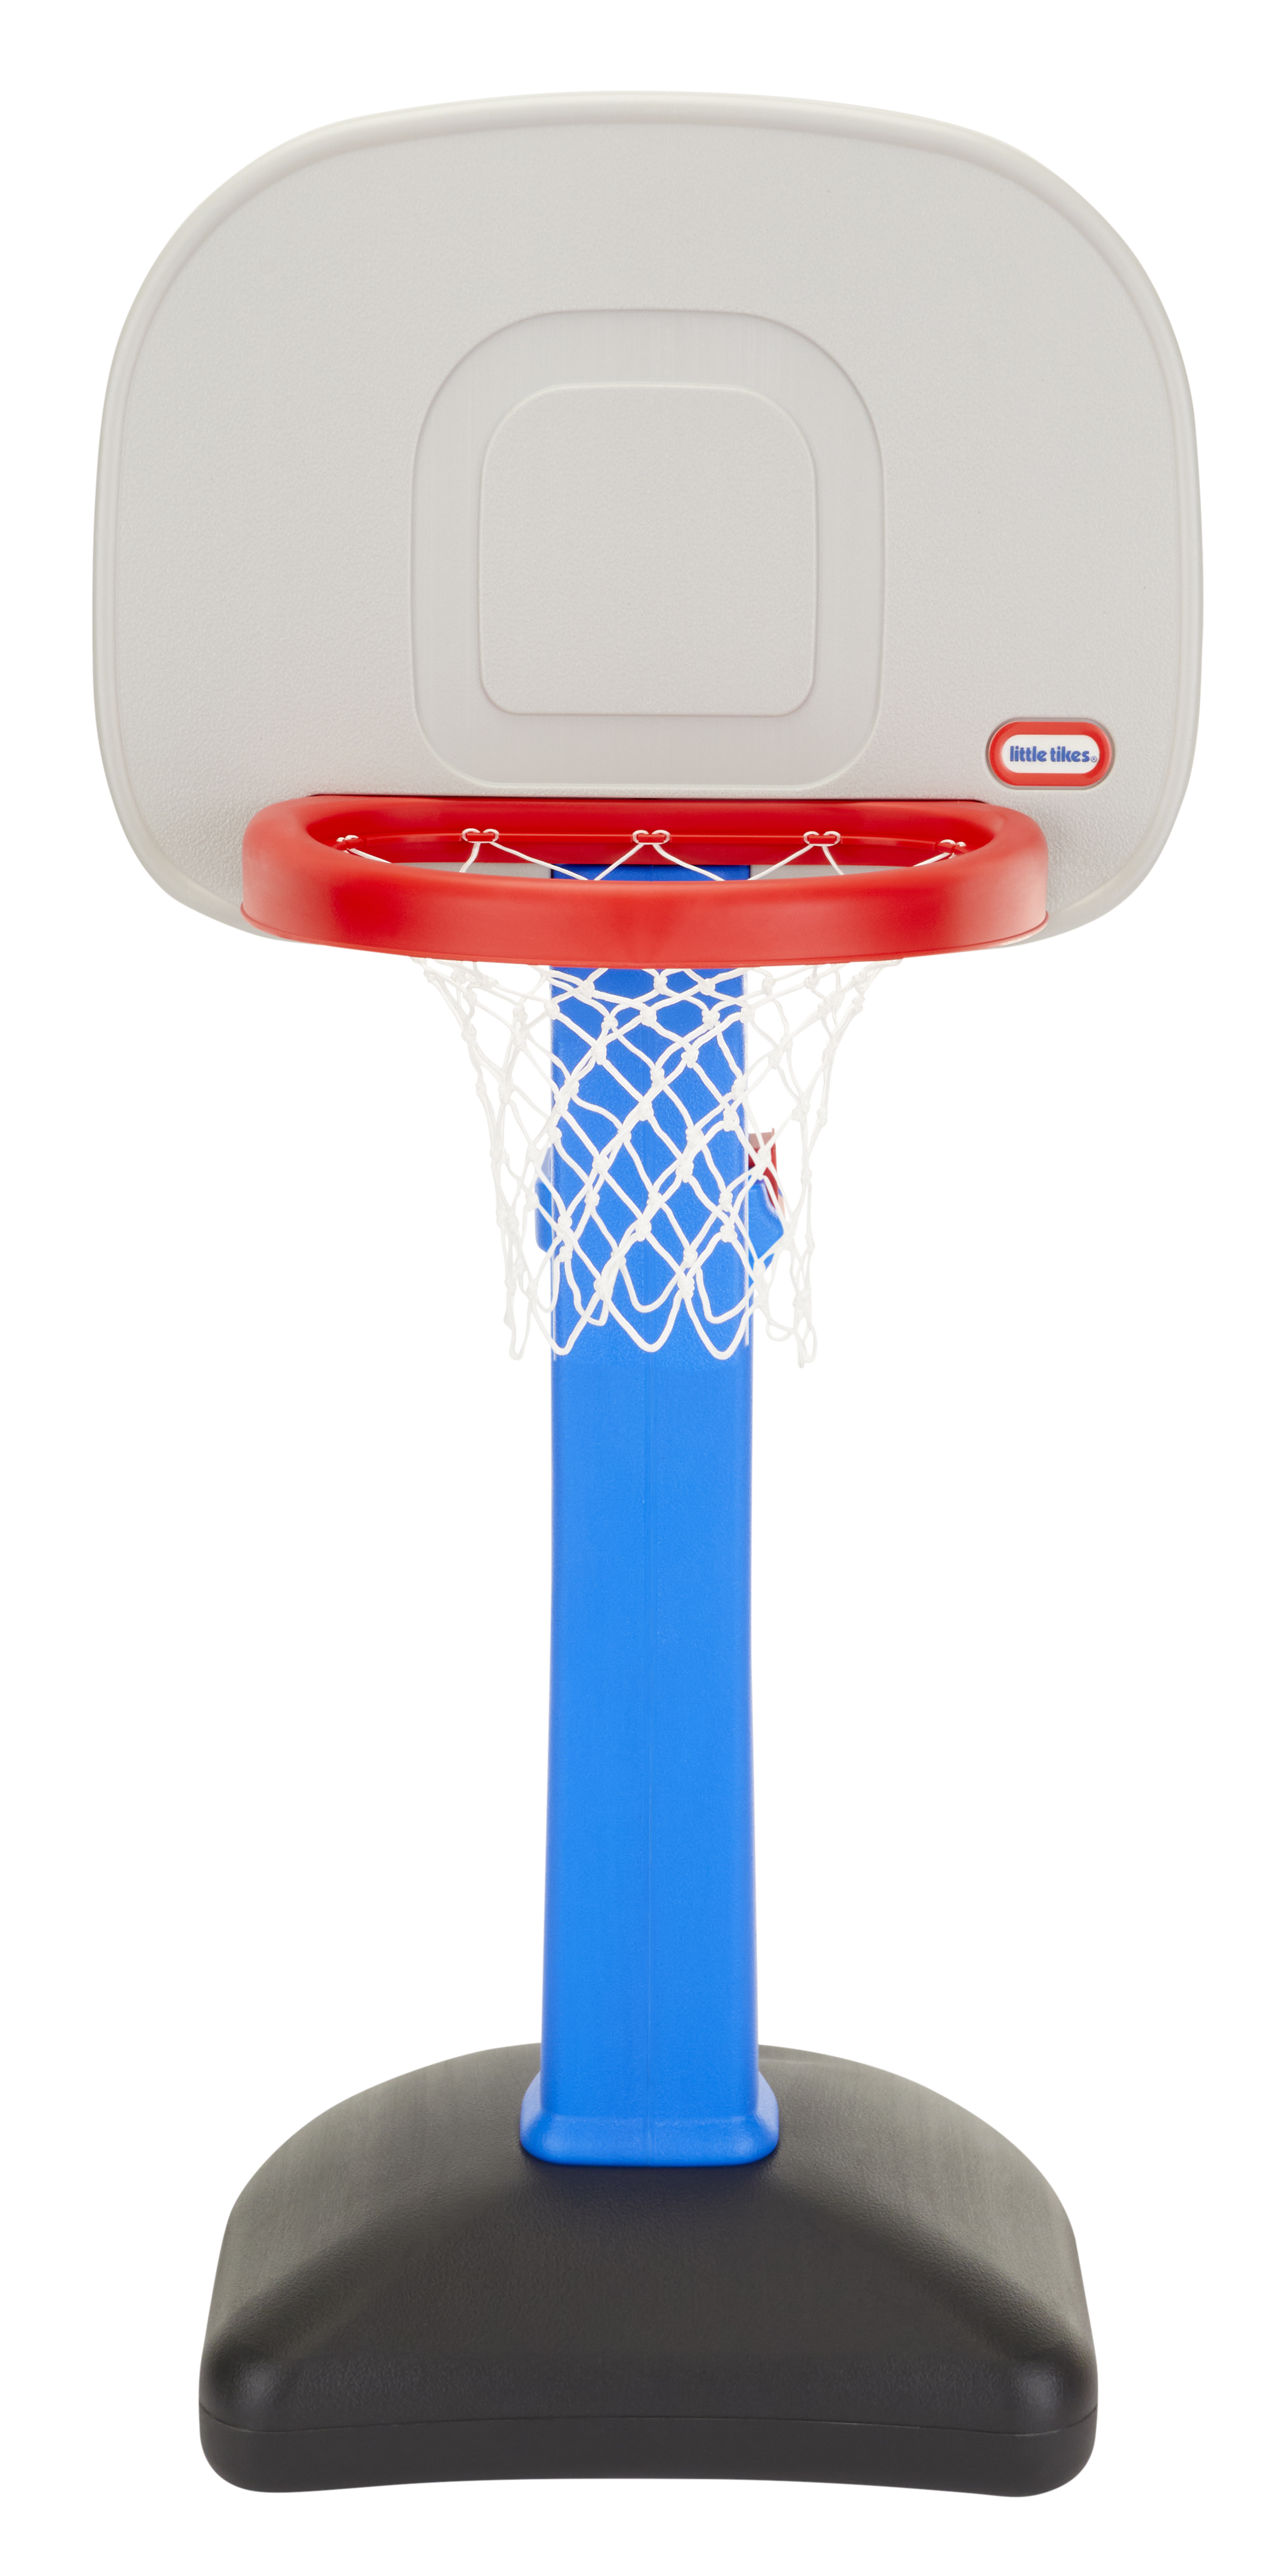 Little Tikes TotSports Easy Score Toy Basketball Hoop with Ball, Height Adjustable, Indoor Outdoor Backyard Toy Sports Play Set, Kids Girls Boys Ages 18 months to 5 Years, Blue - image 3 of 6